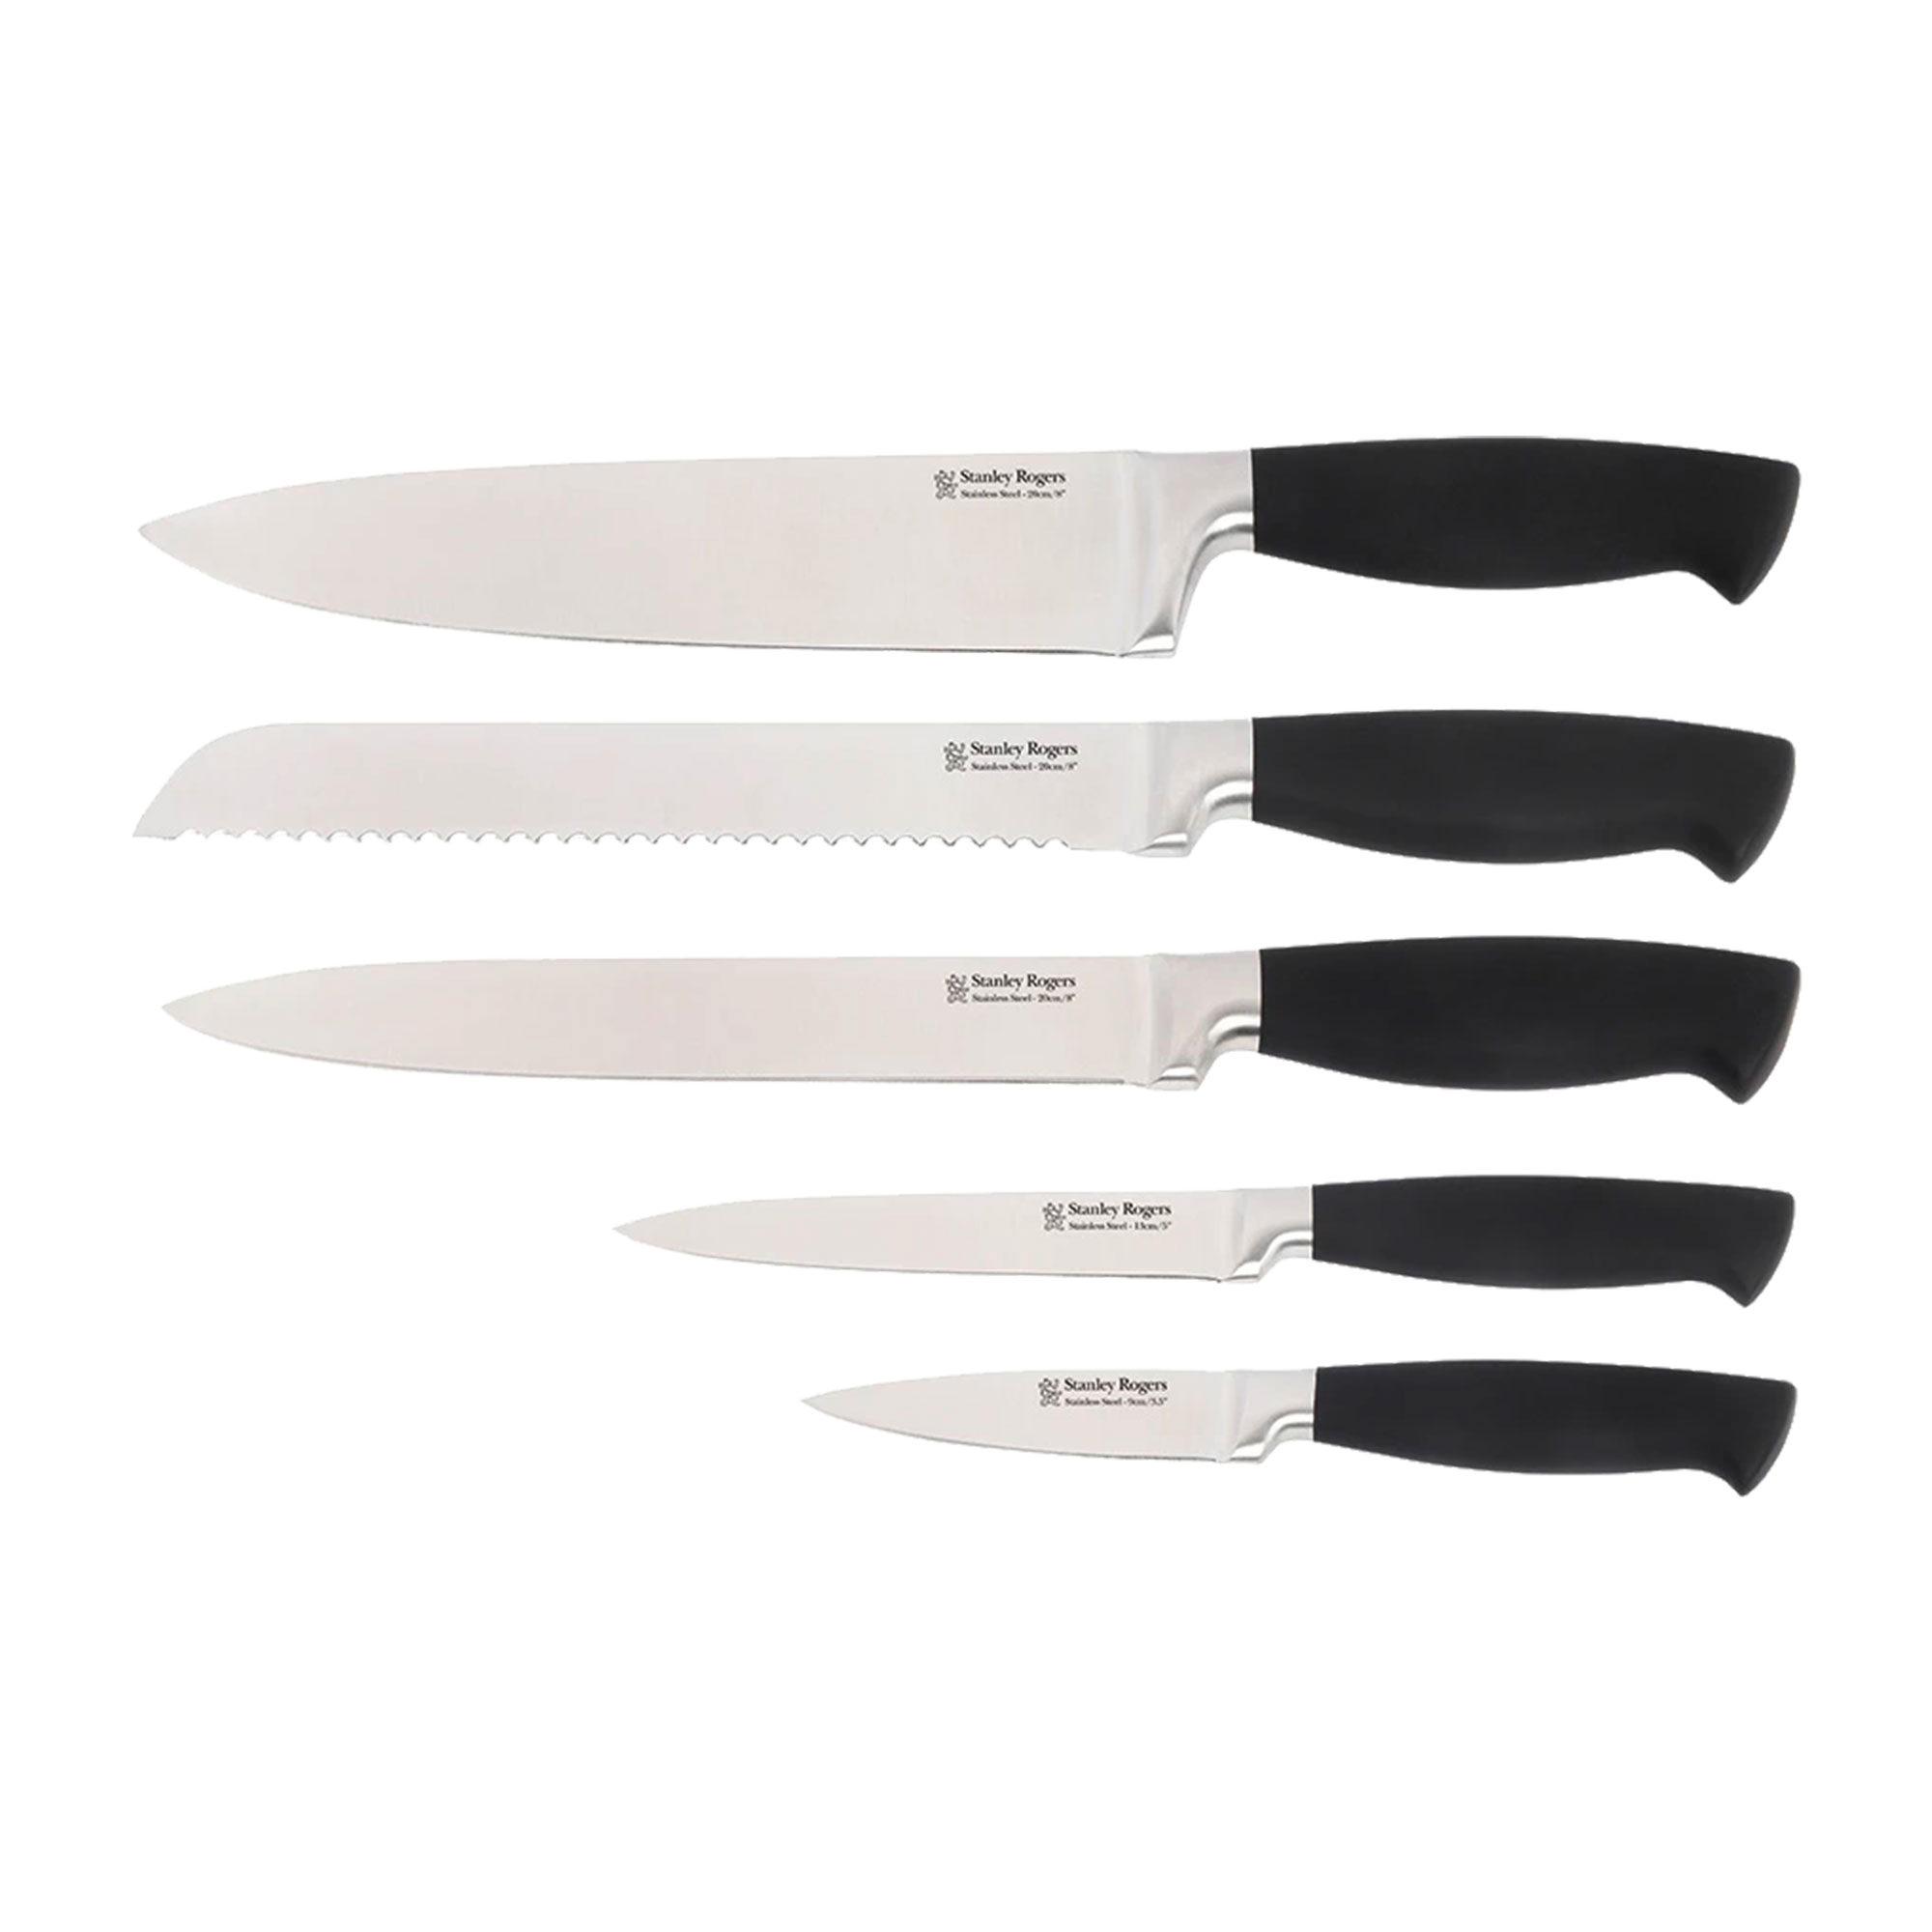 Stanley Rogers 6pc Quickdraw Knife Block Set Image 3